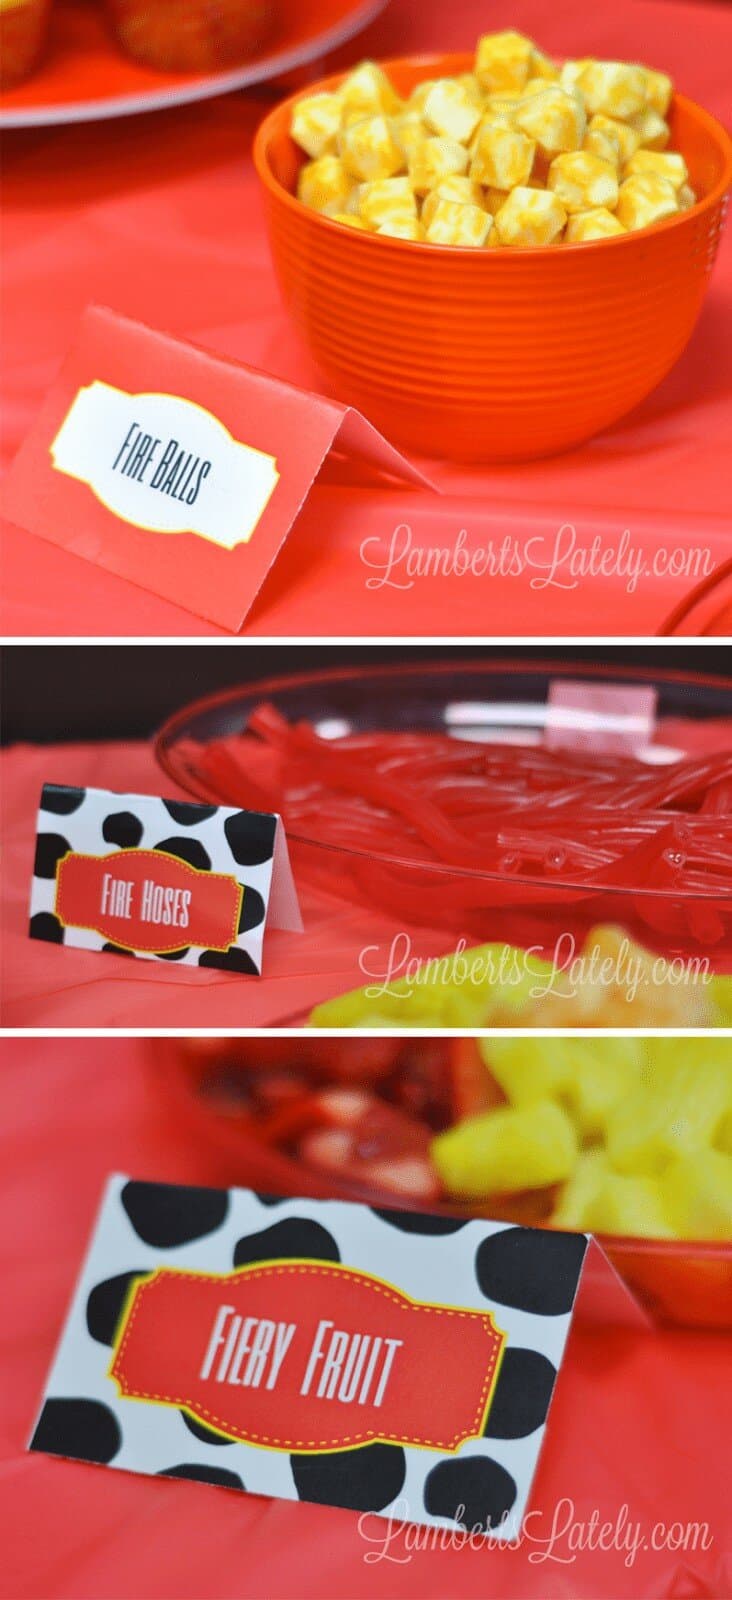 Great food table ideas for fireman/firetruck birthday party!  Menu and free printables included.